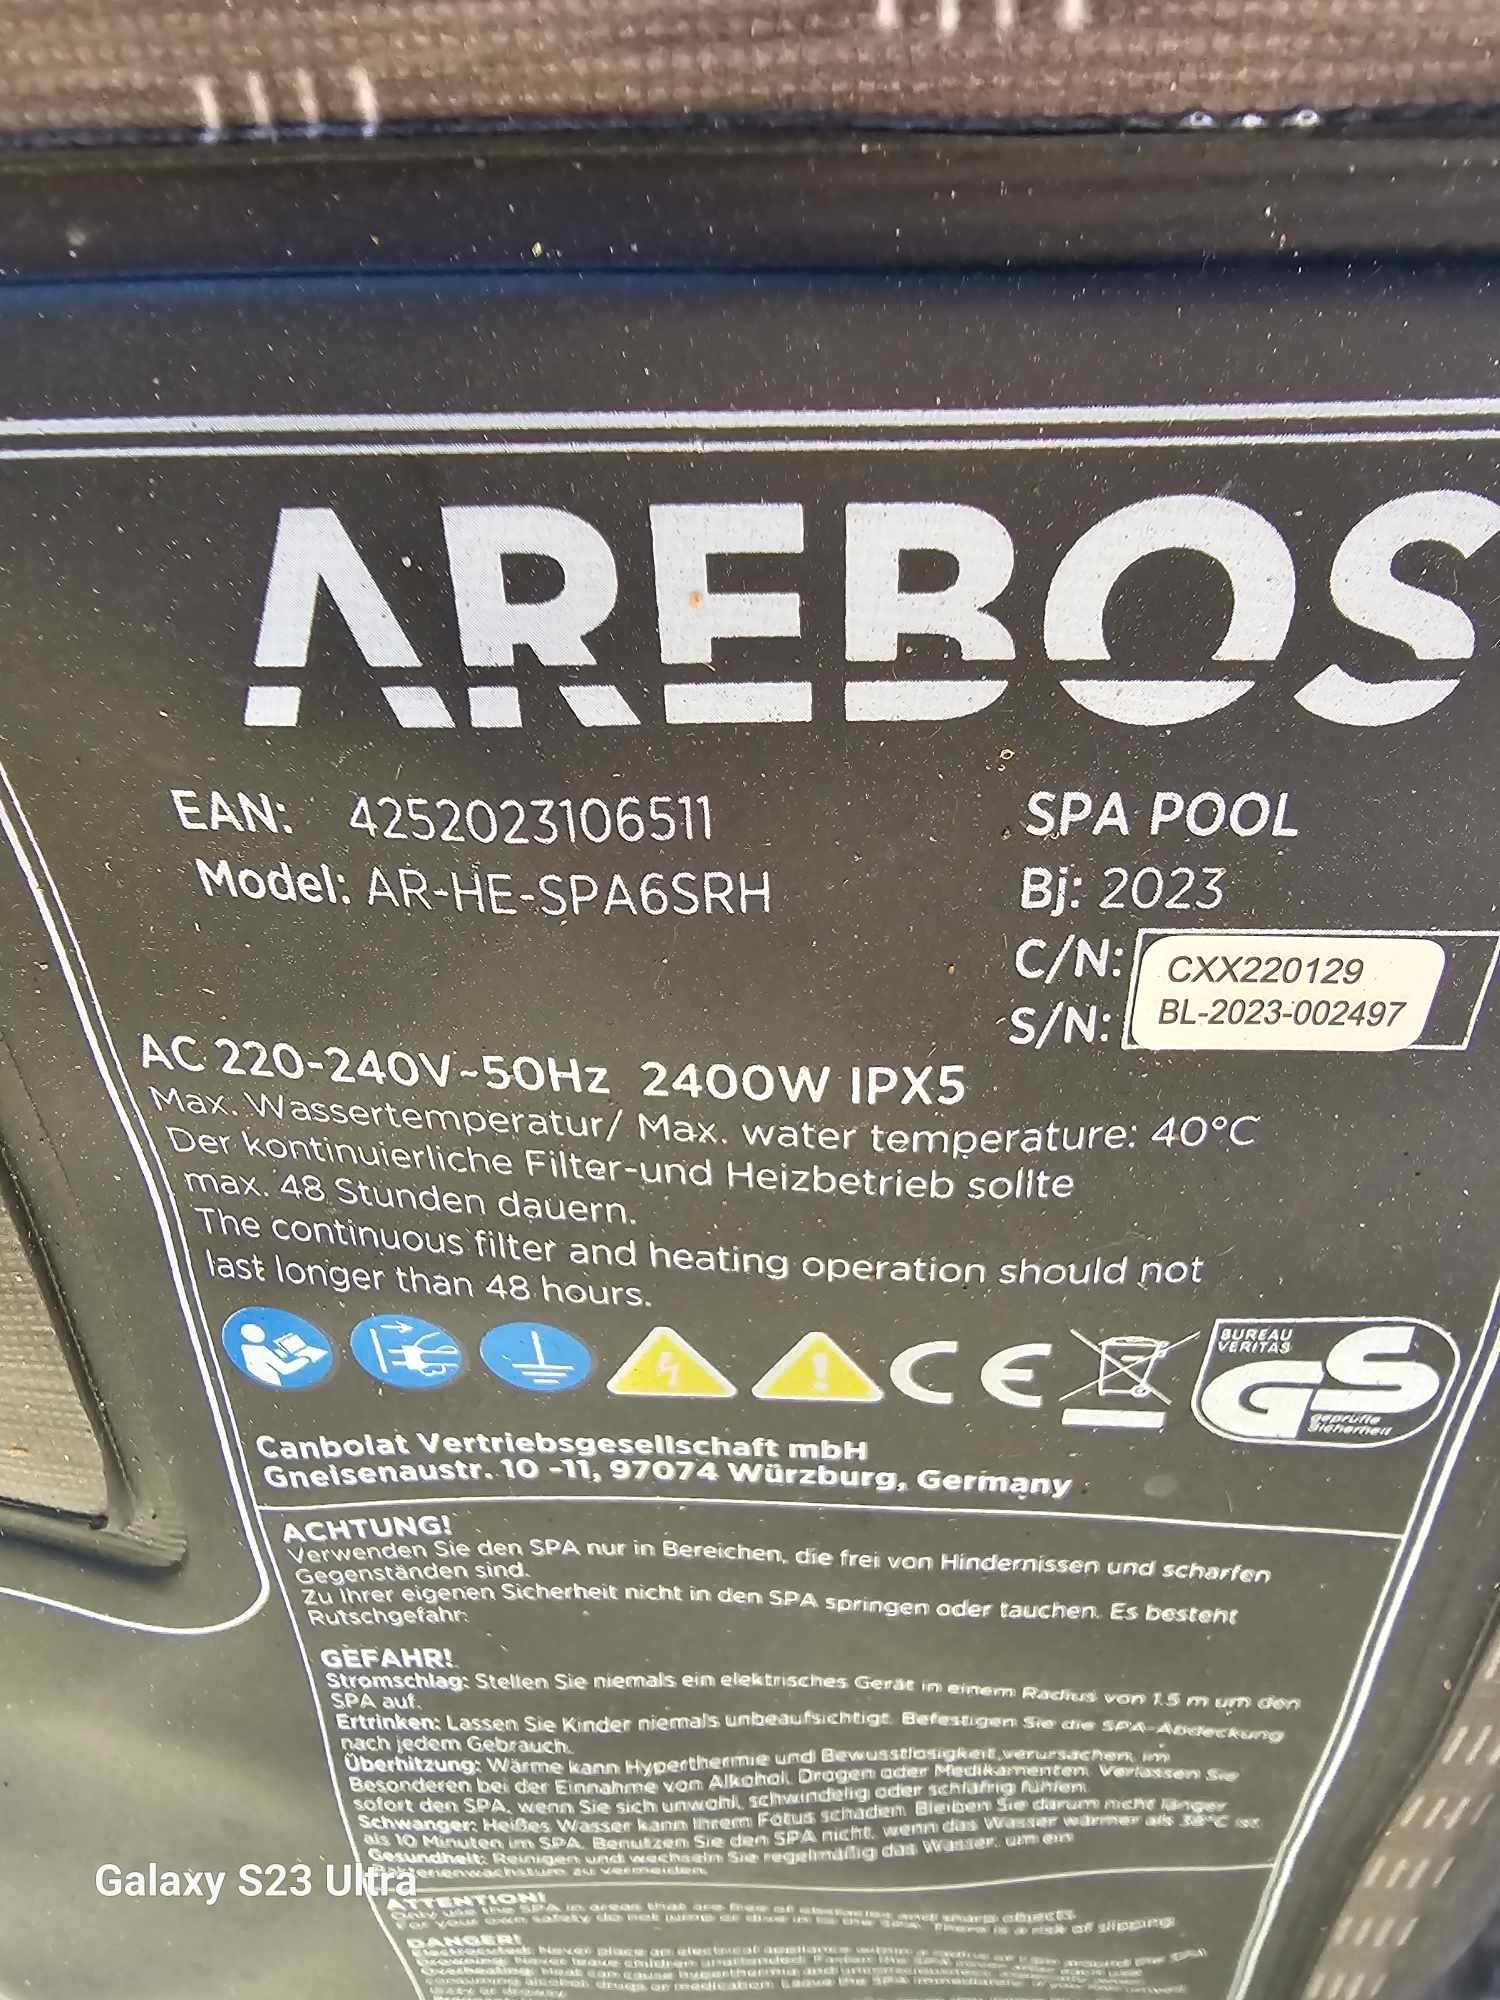 Jacuzzi Arebos AR-HE-SPA6SRH 900 l